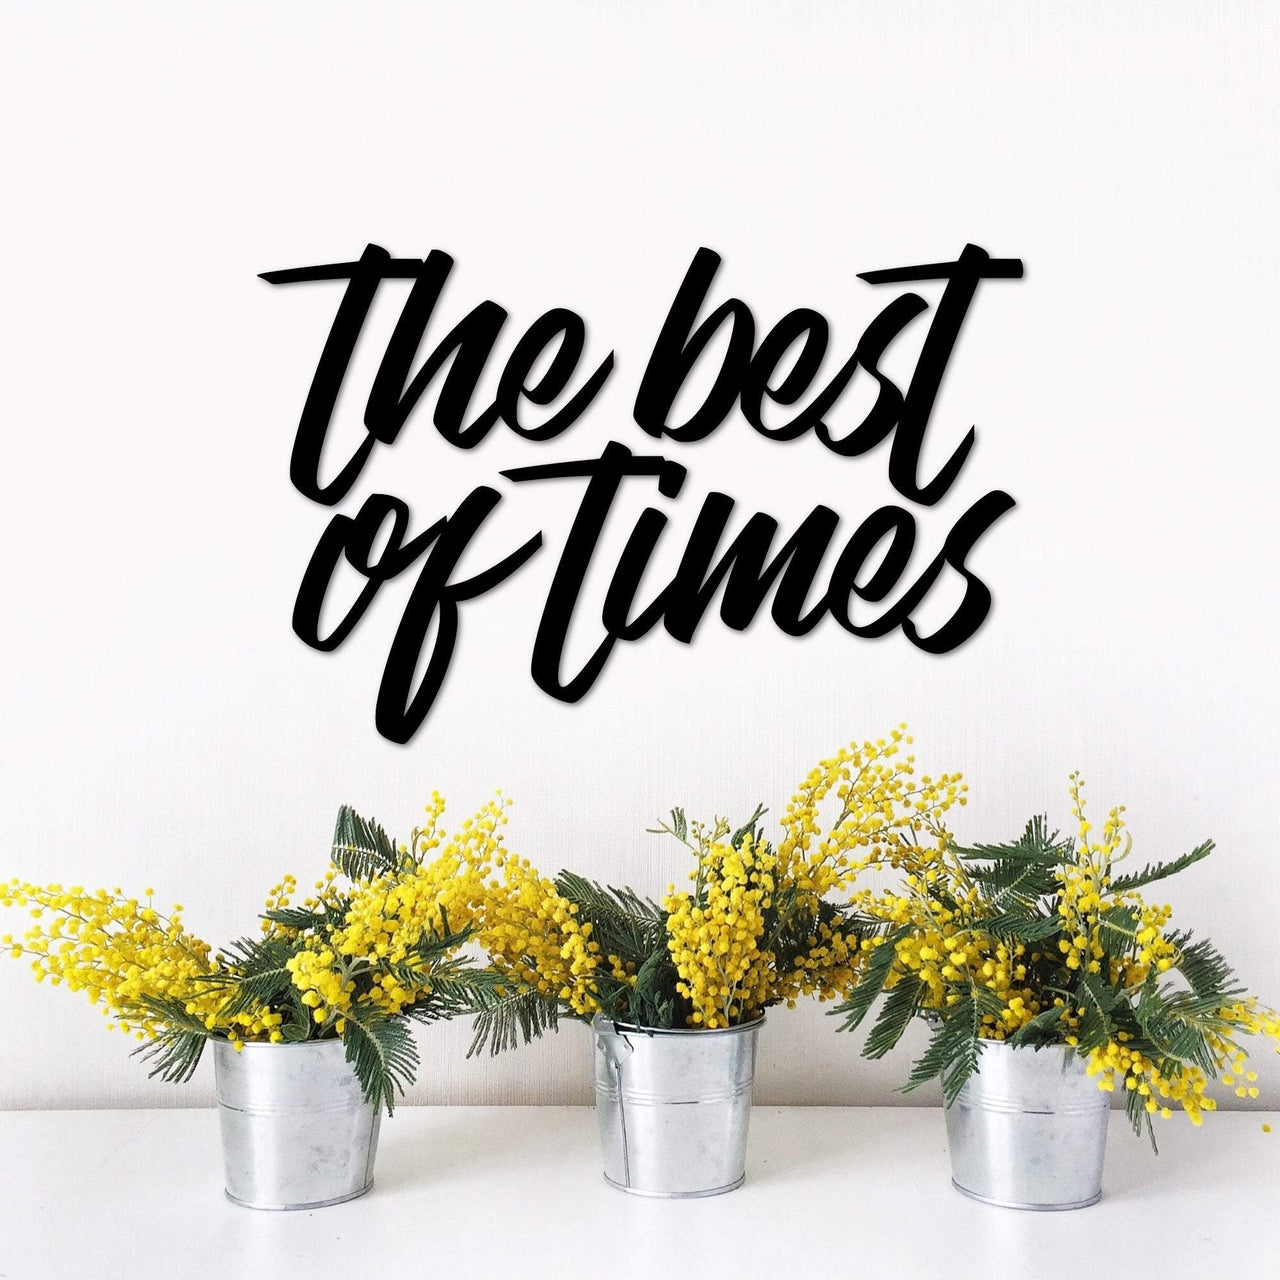 The Best of Times Sign | Metal Wall Quote | Metal Cutout | Gallery Wall Decor | Living Room Decor | Memories Wall Phrase to put by Clock